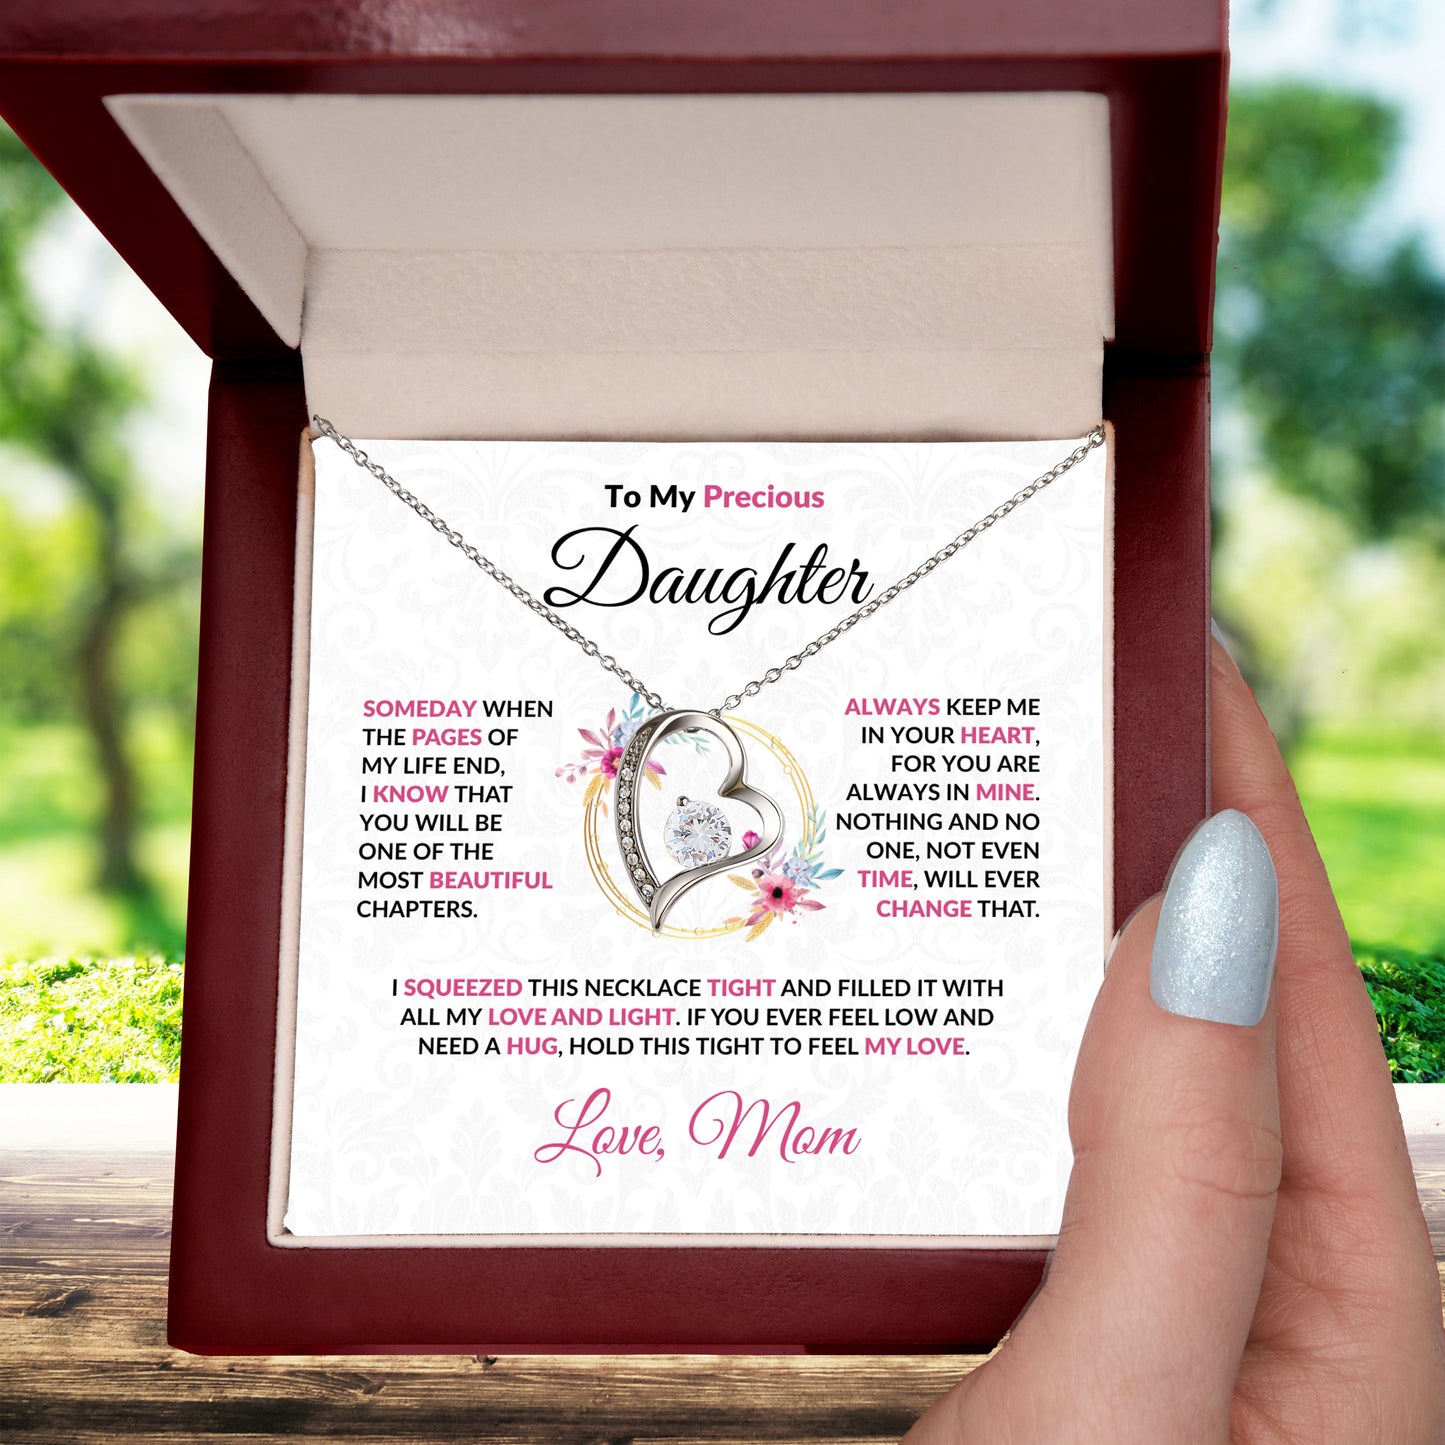 To My Precious Daughter Forever Love Pendant Necklace with Message Card and Gift Box